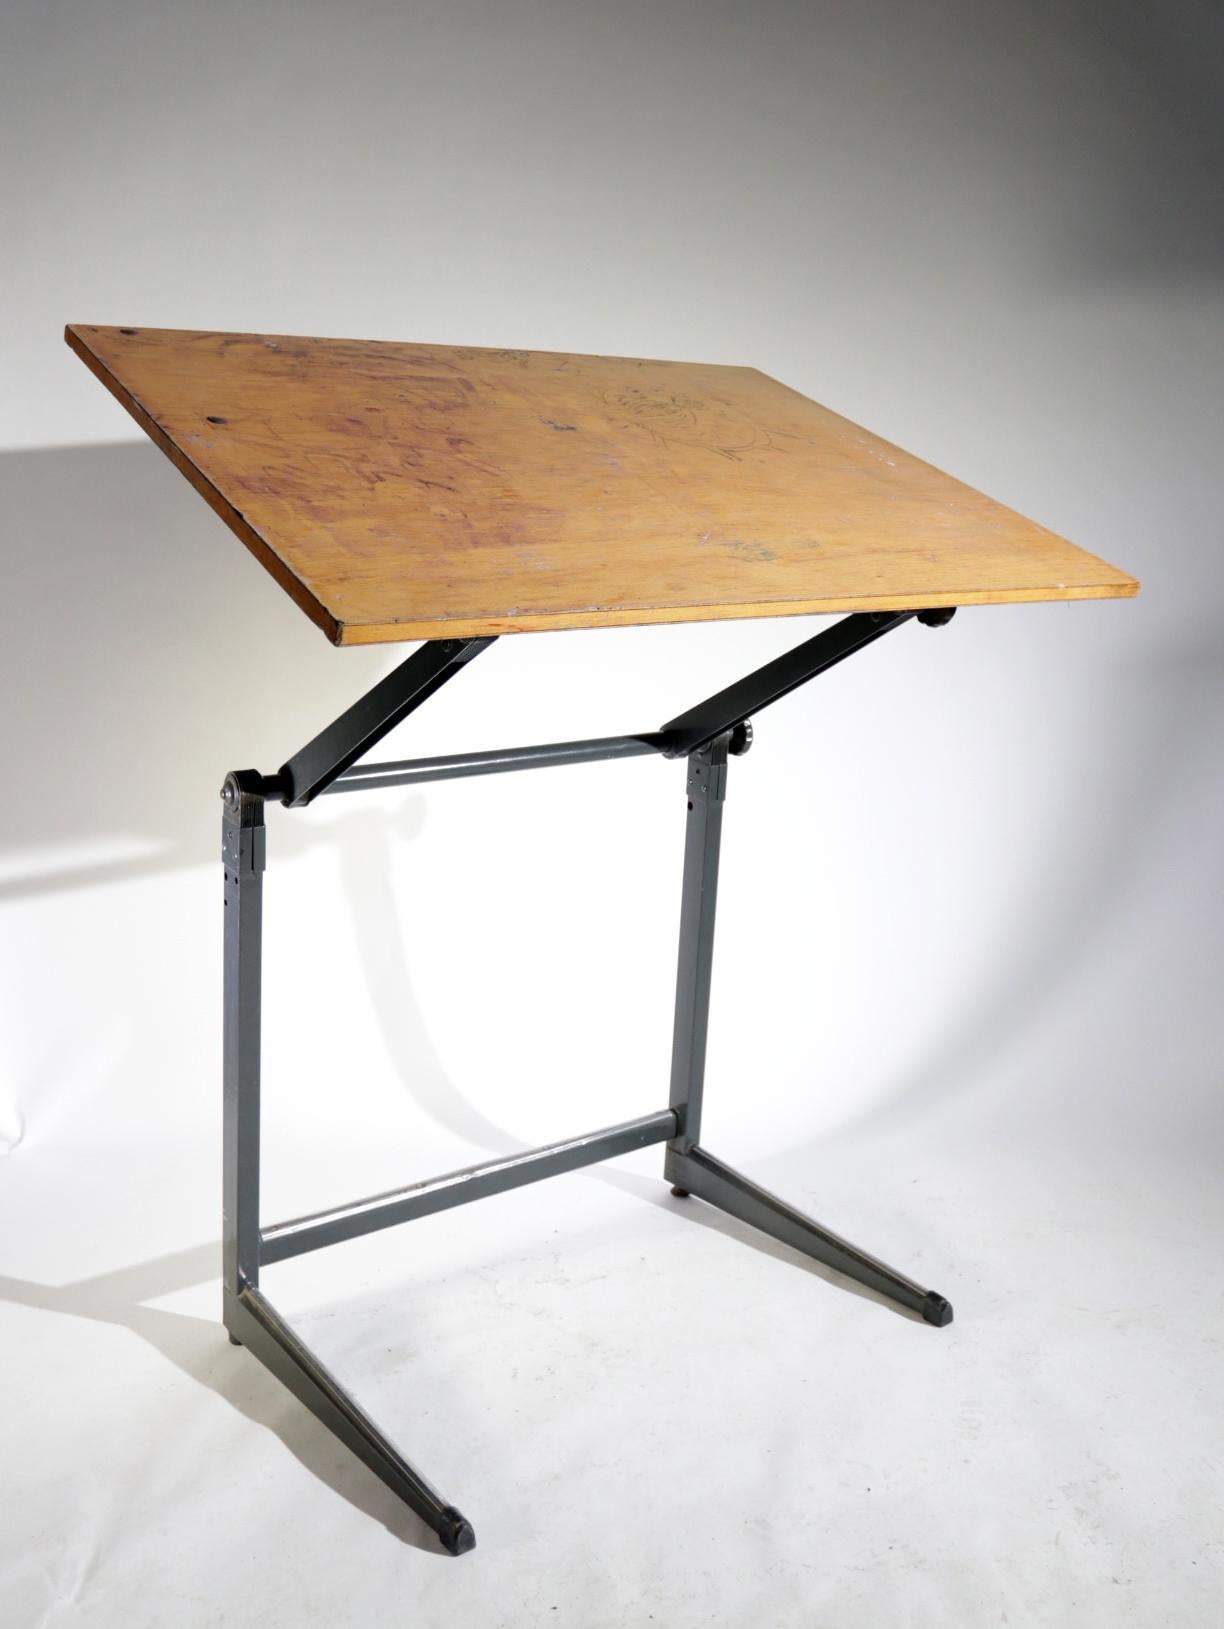 Marko Architect drafting table Dutch design from the 1960.
You can fold this table together or put it almost upright.
On the tabletop you can still see remains of old drawings and a signature.
Dimensions tabletop: 75.5 x 100.5 cm.